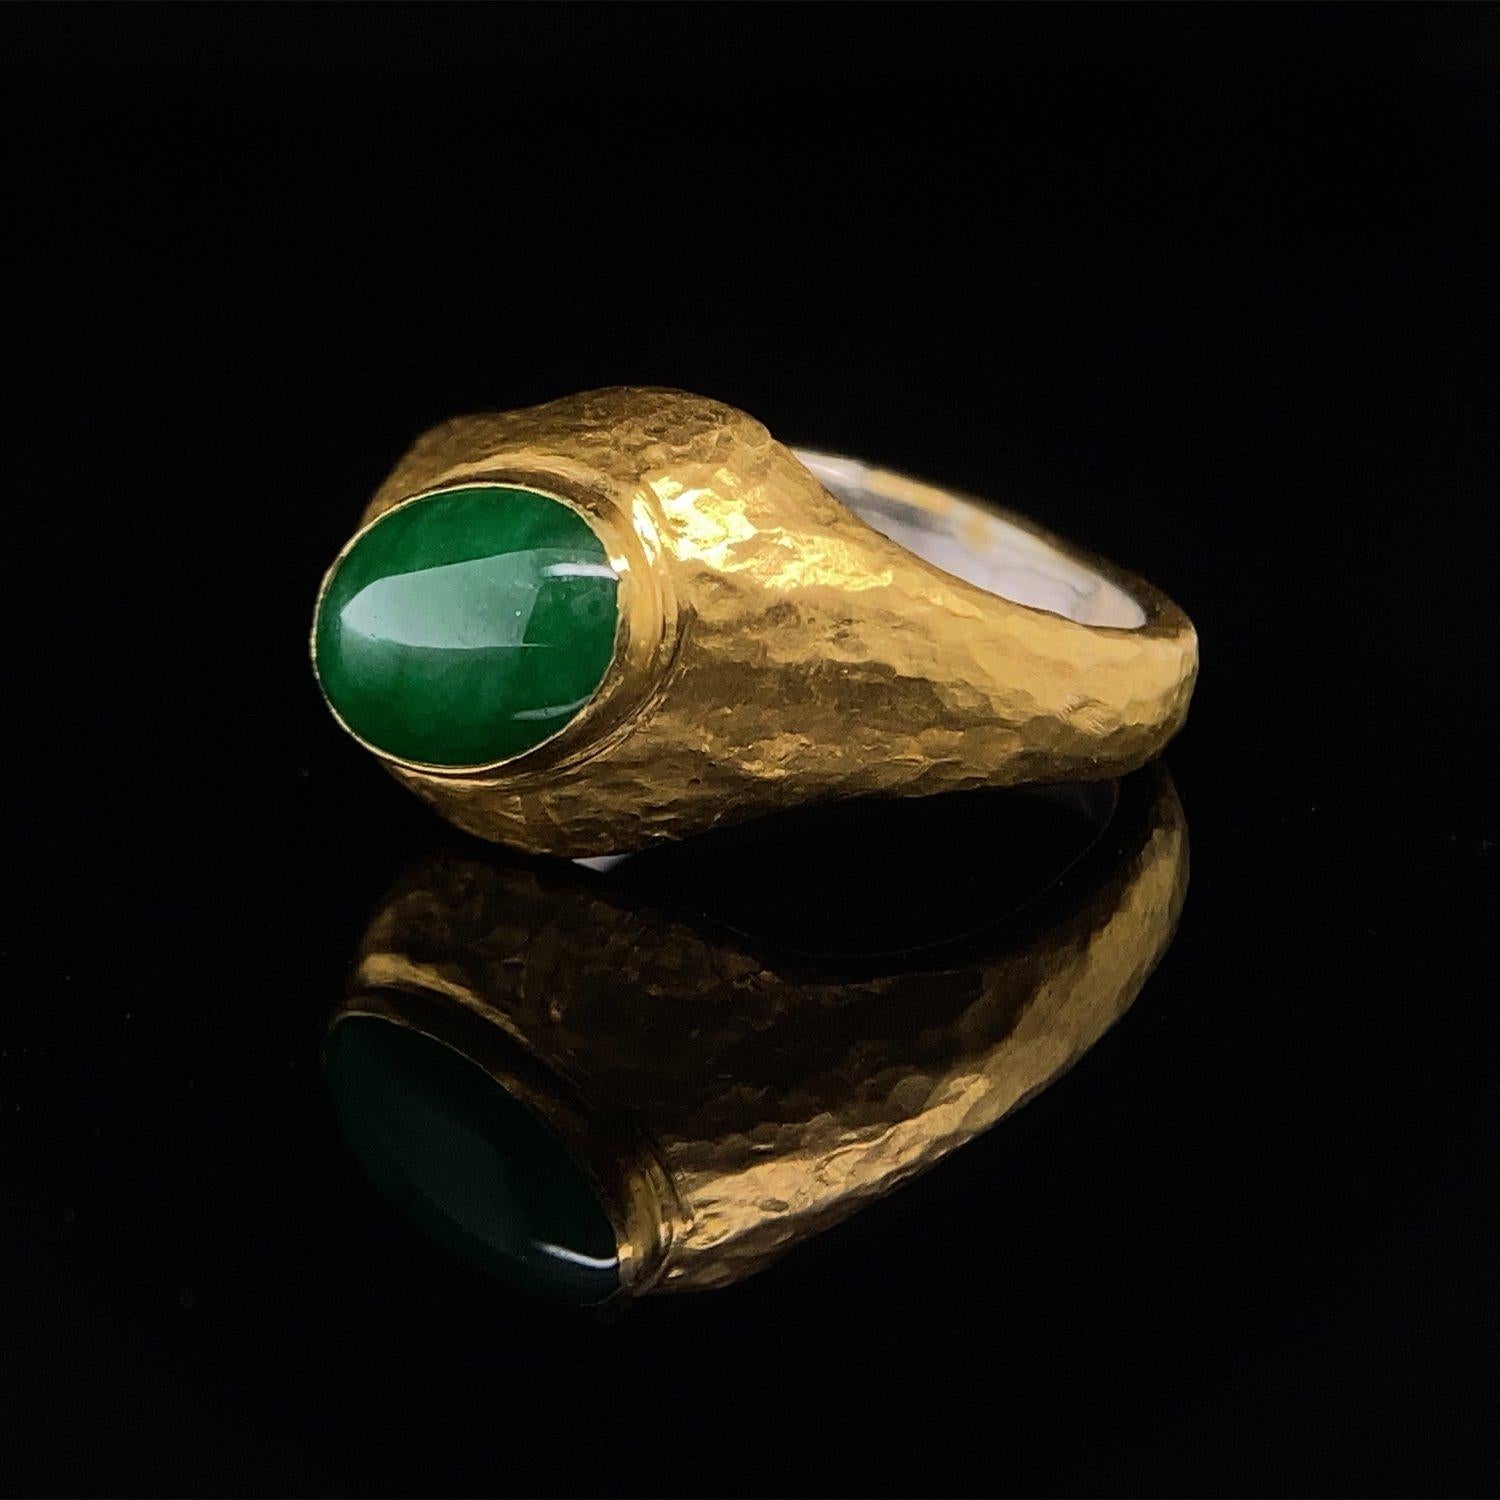 Oval Cut 2.5 Carat Oval Domed Smooth Bright Green Jade Cabochon Ring 24K Hammered Gold